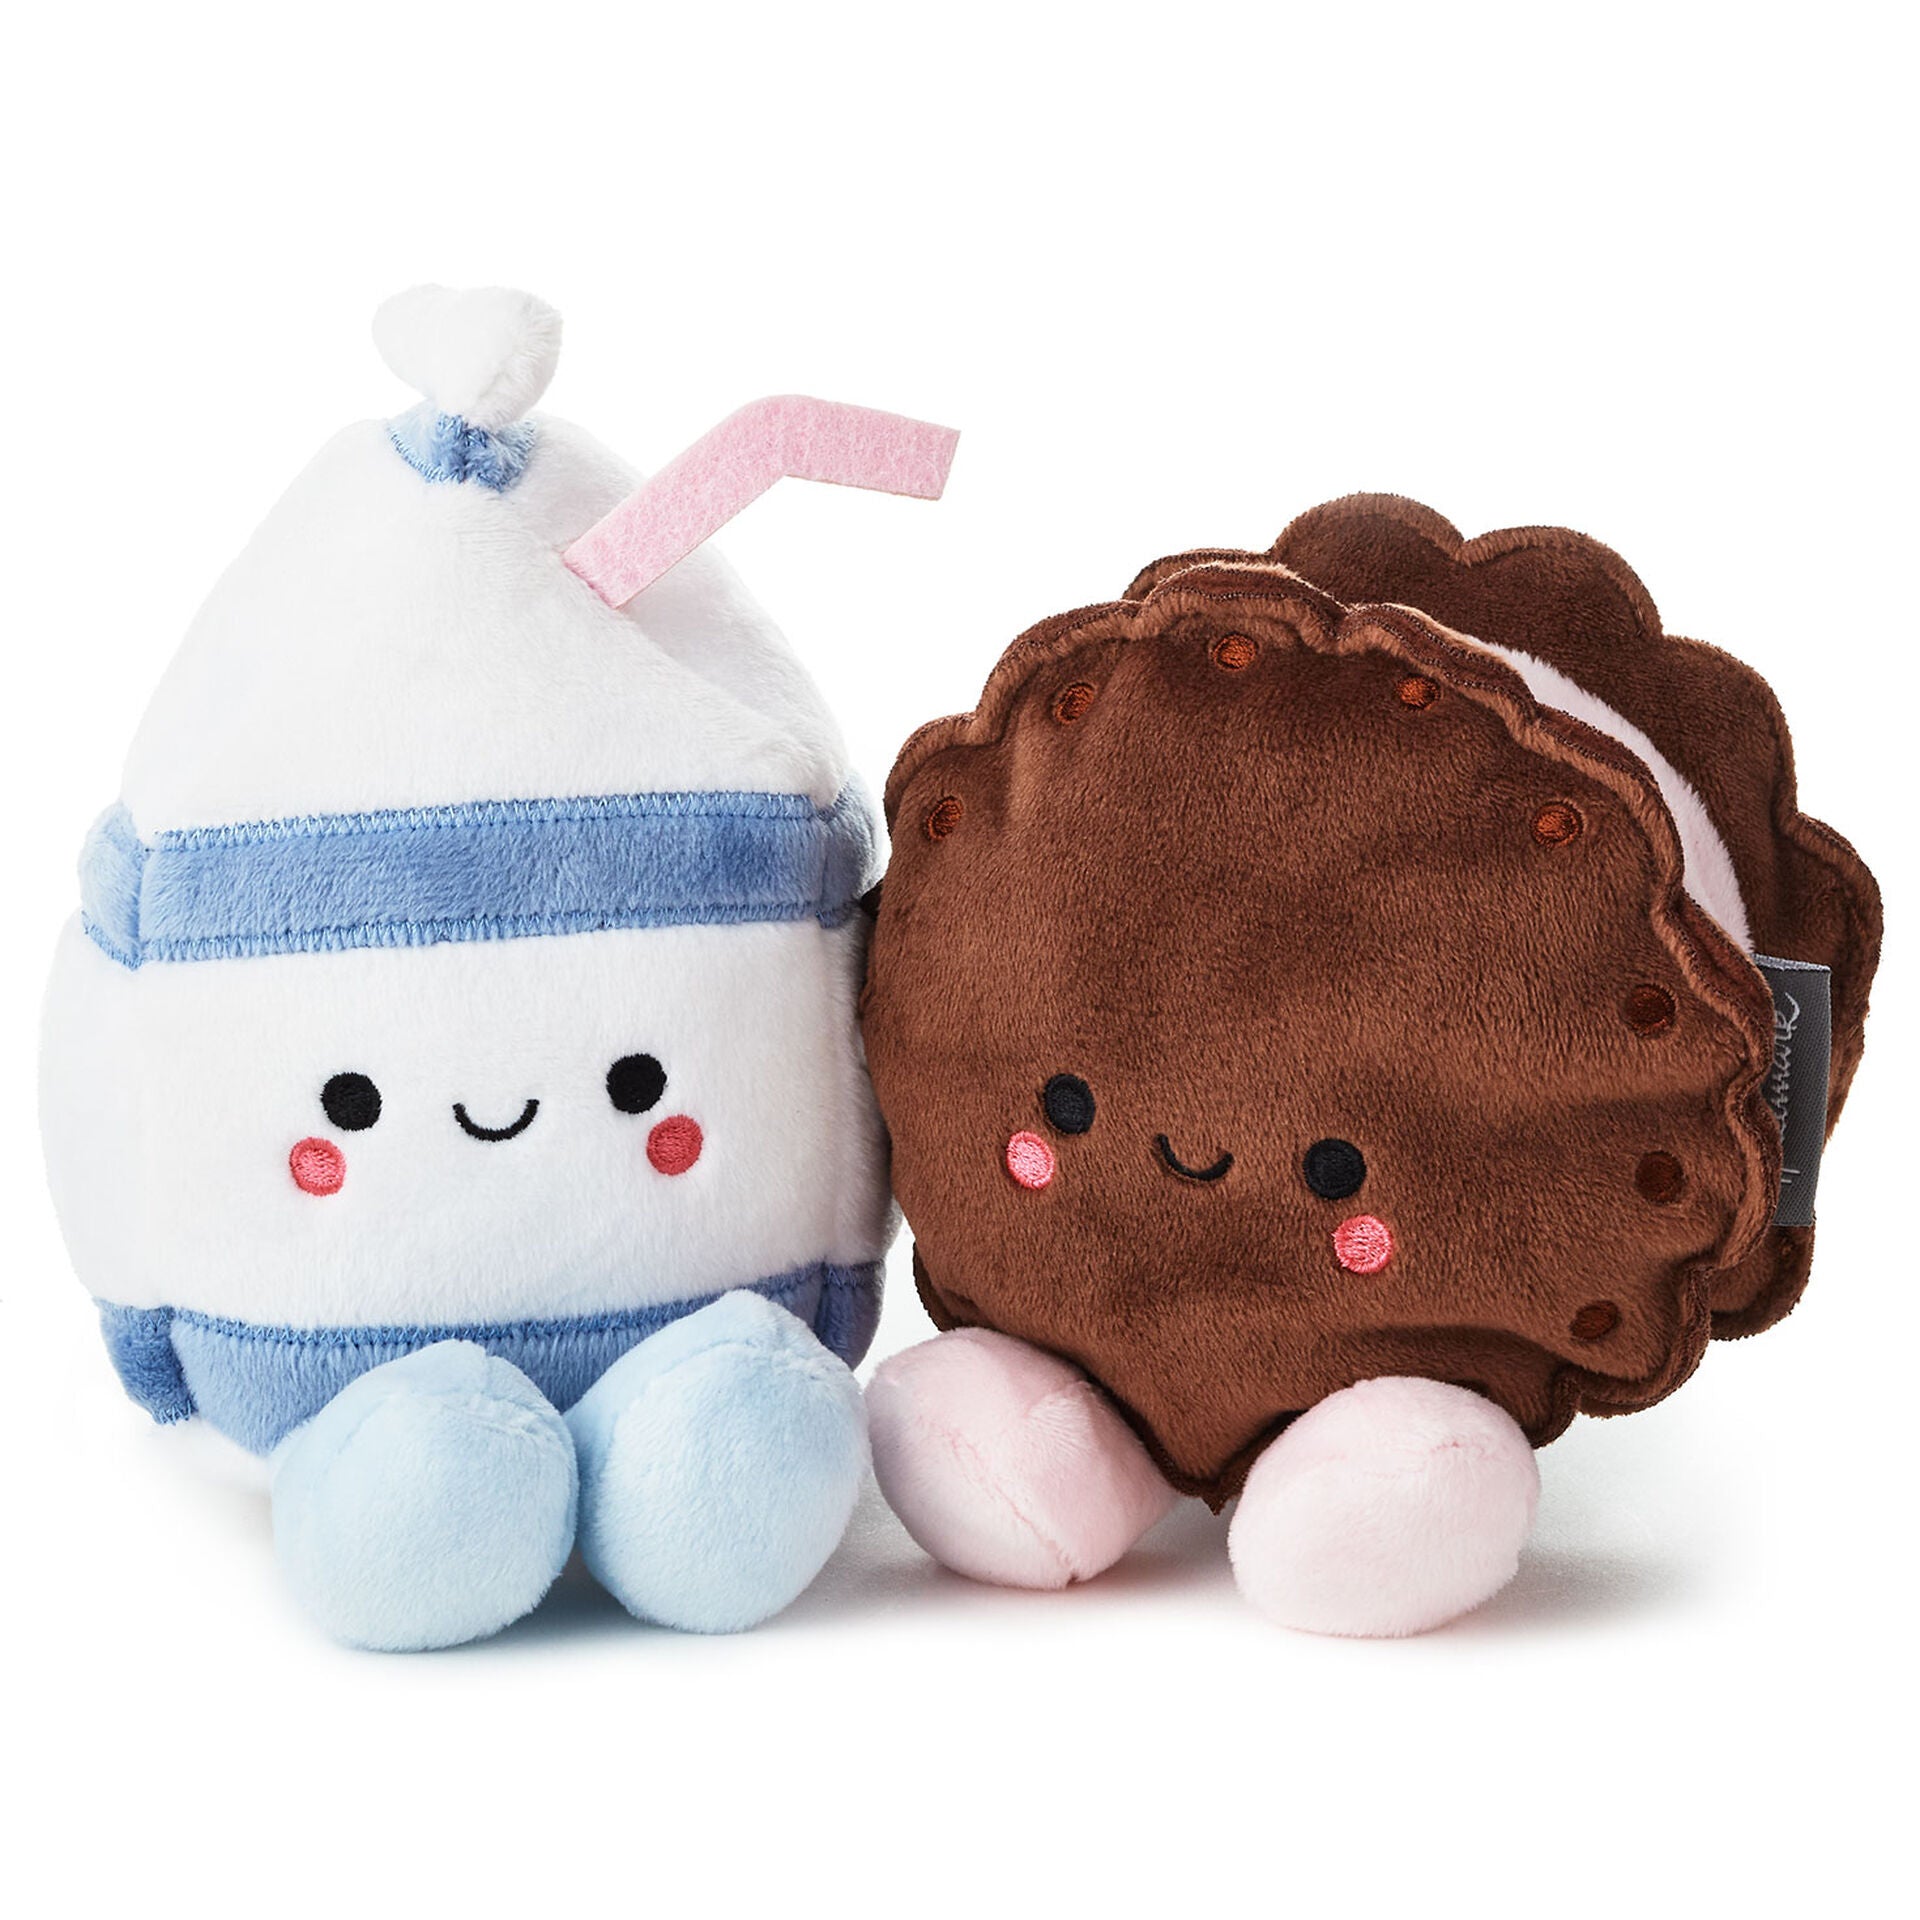 Better Together Steak and Potato Magnetic Plush